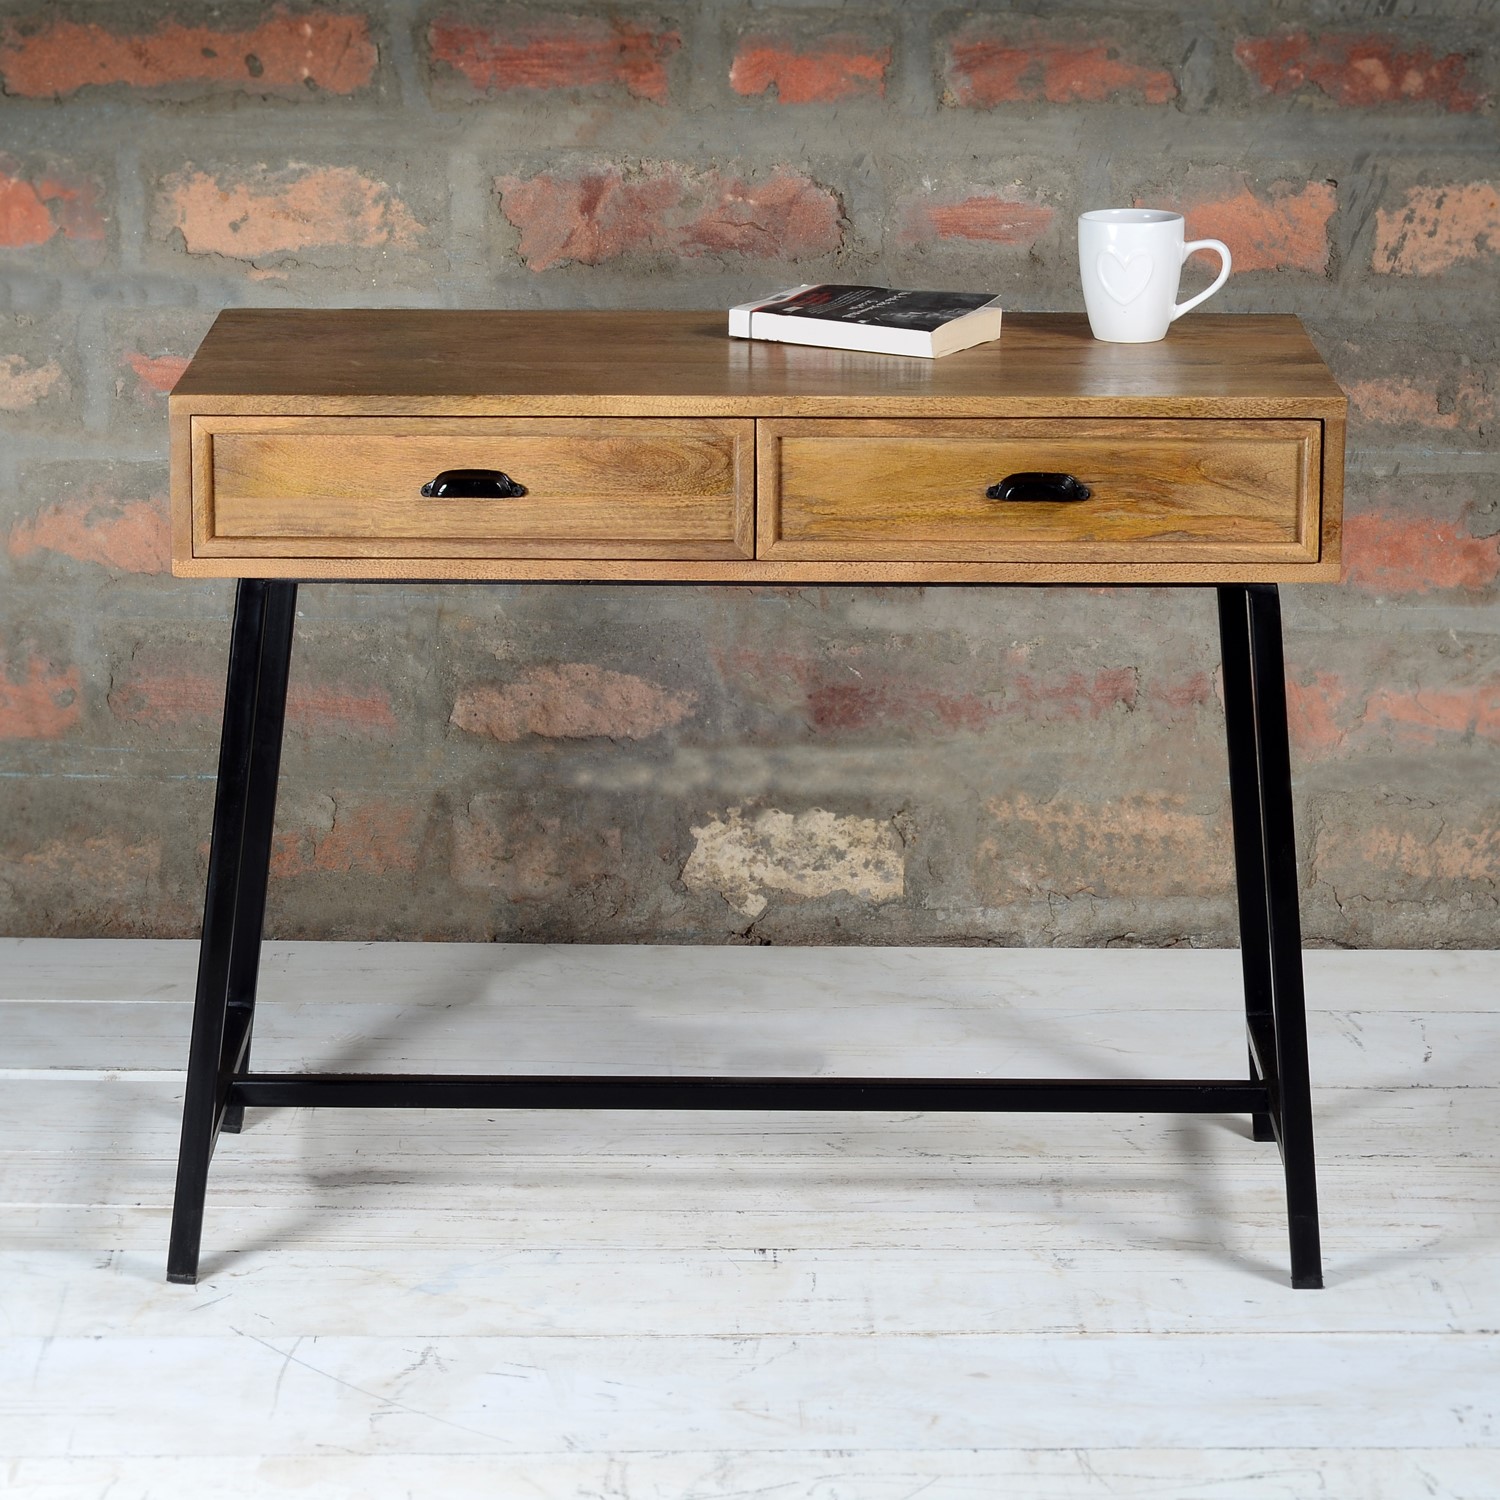 Suri Industrial Coffee Table with Drawer in Mango Wood and Metal